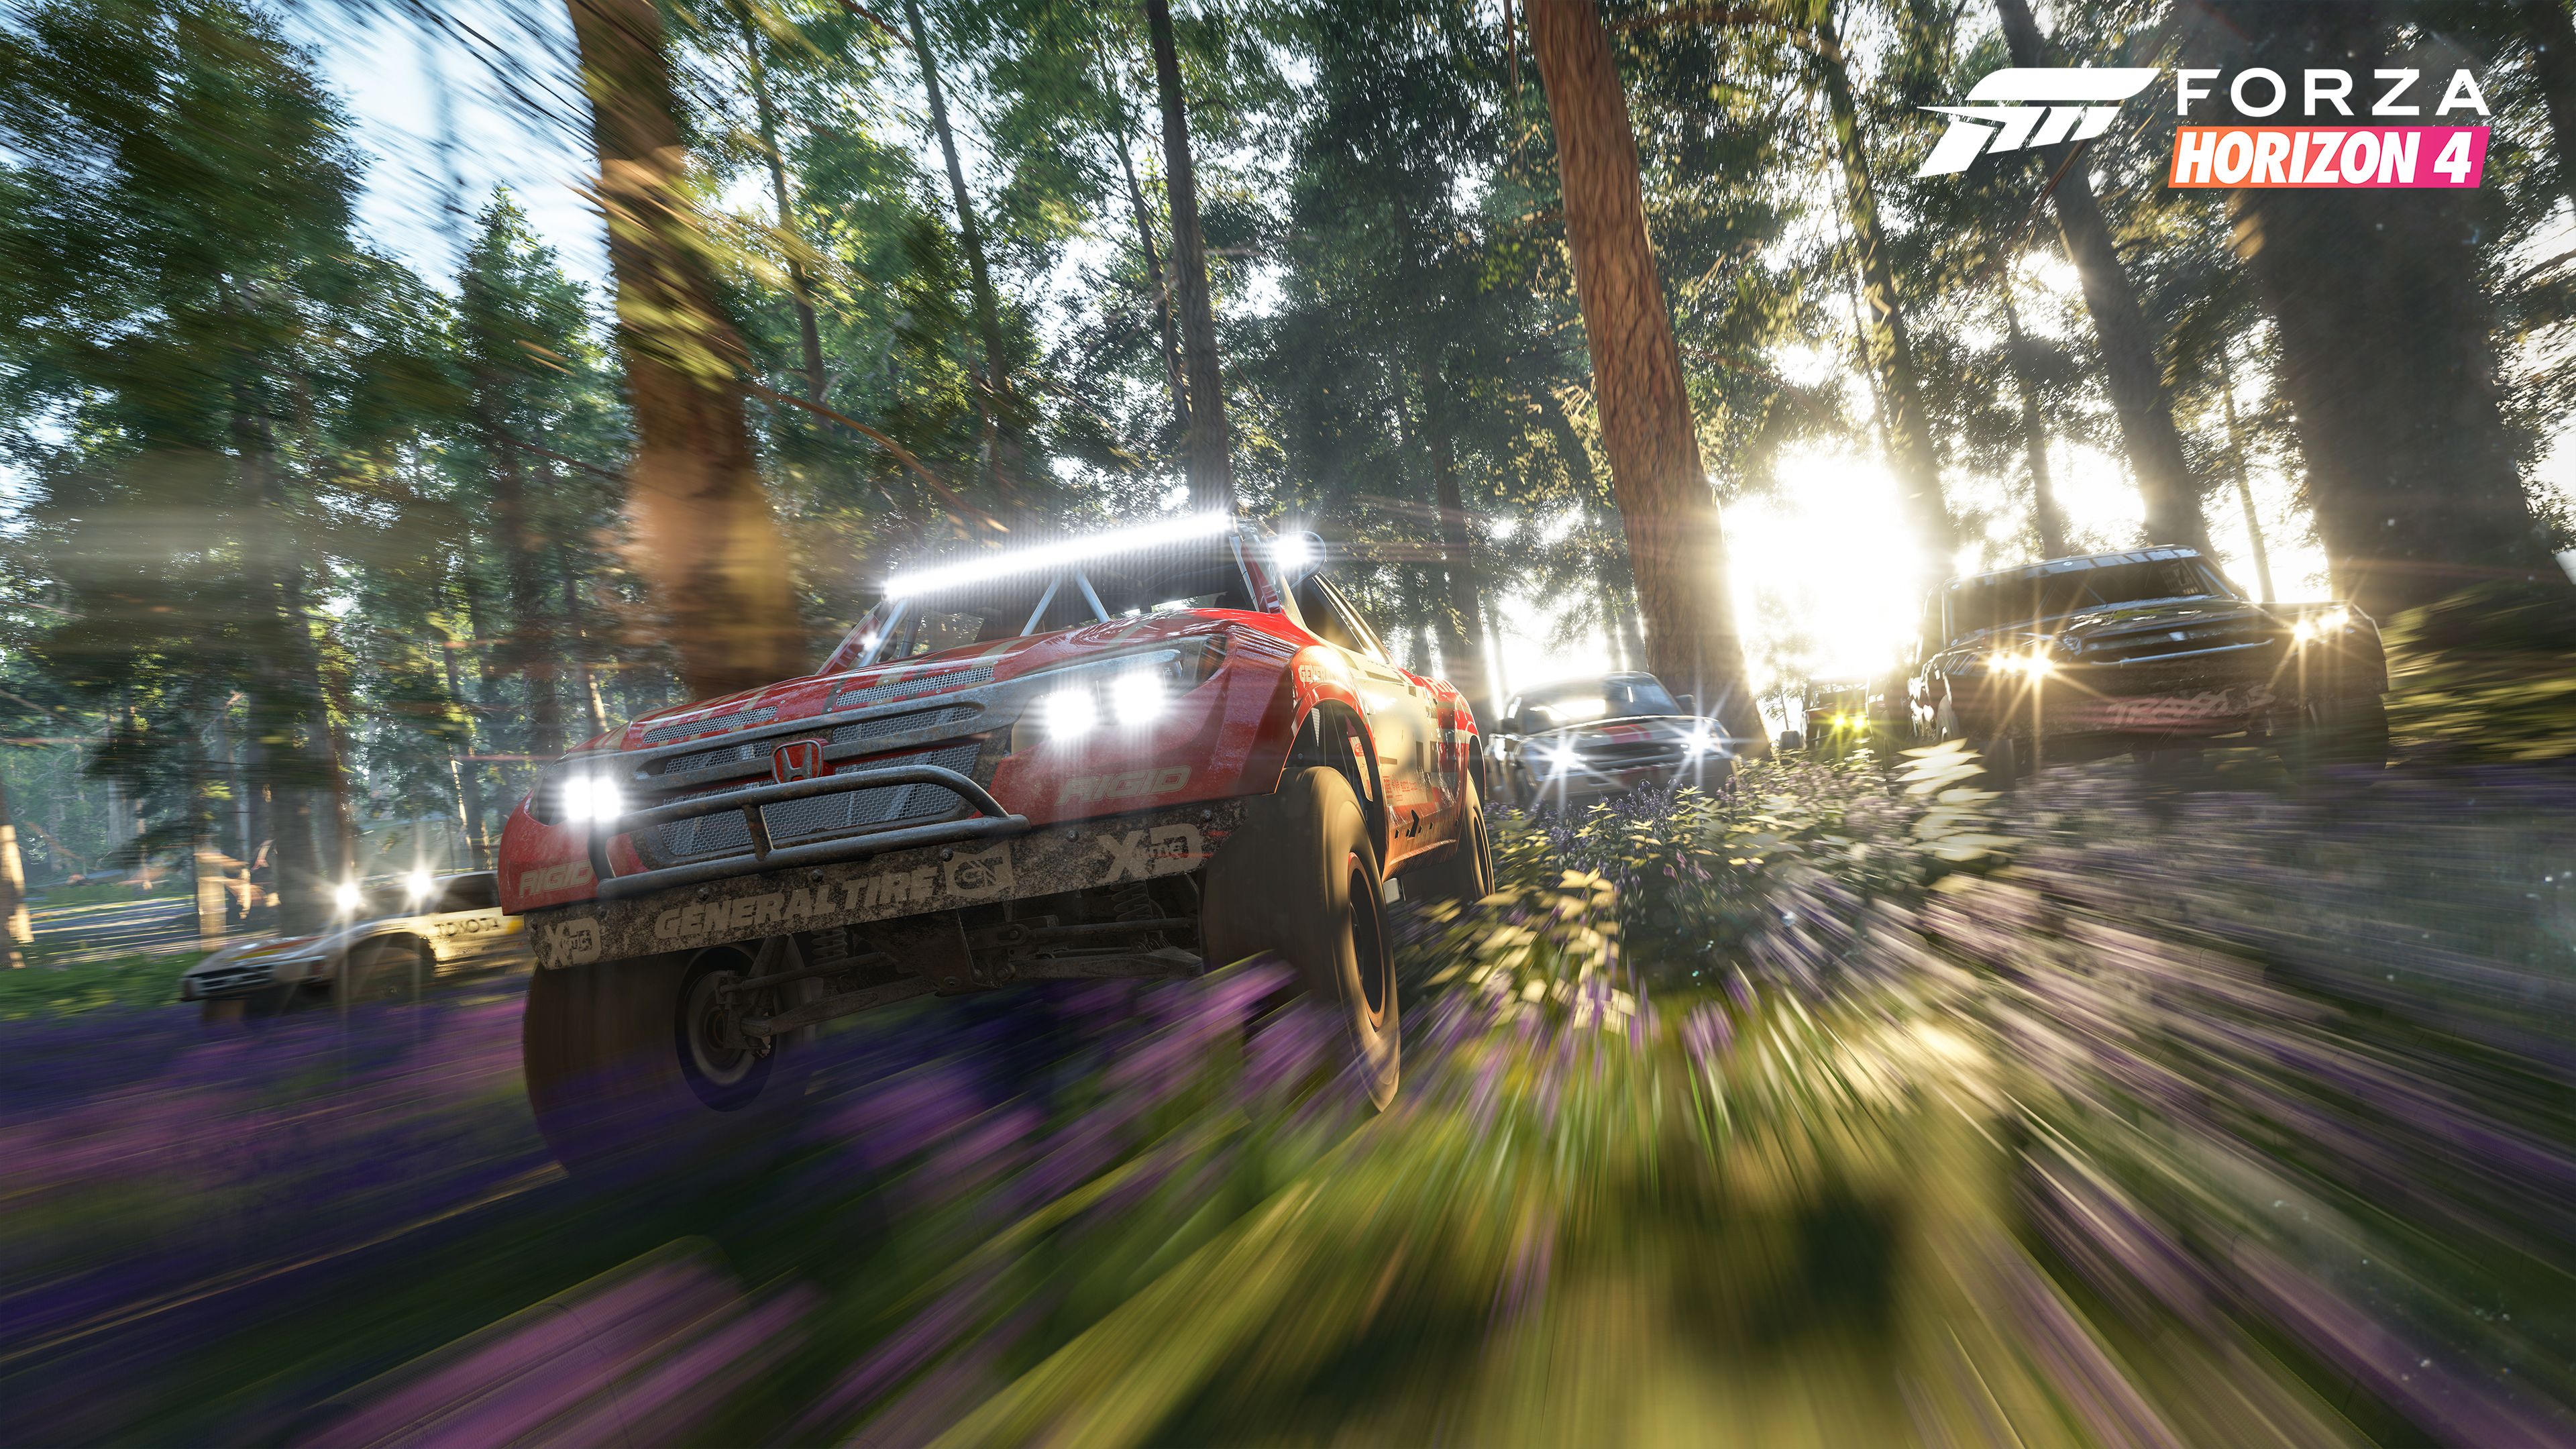 Preview: Forza Horizon 4 is like your dad: fast and smooth reviews